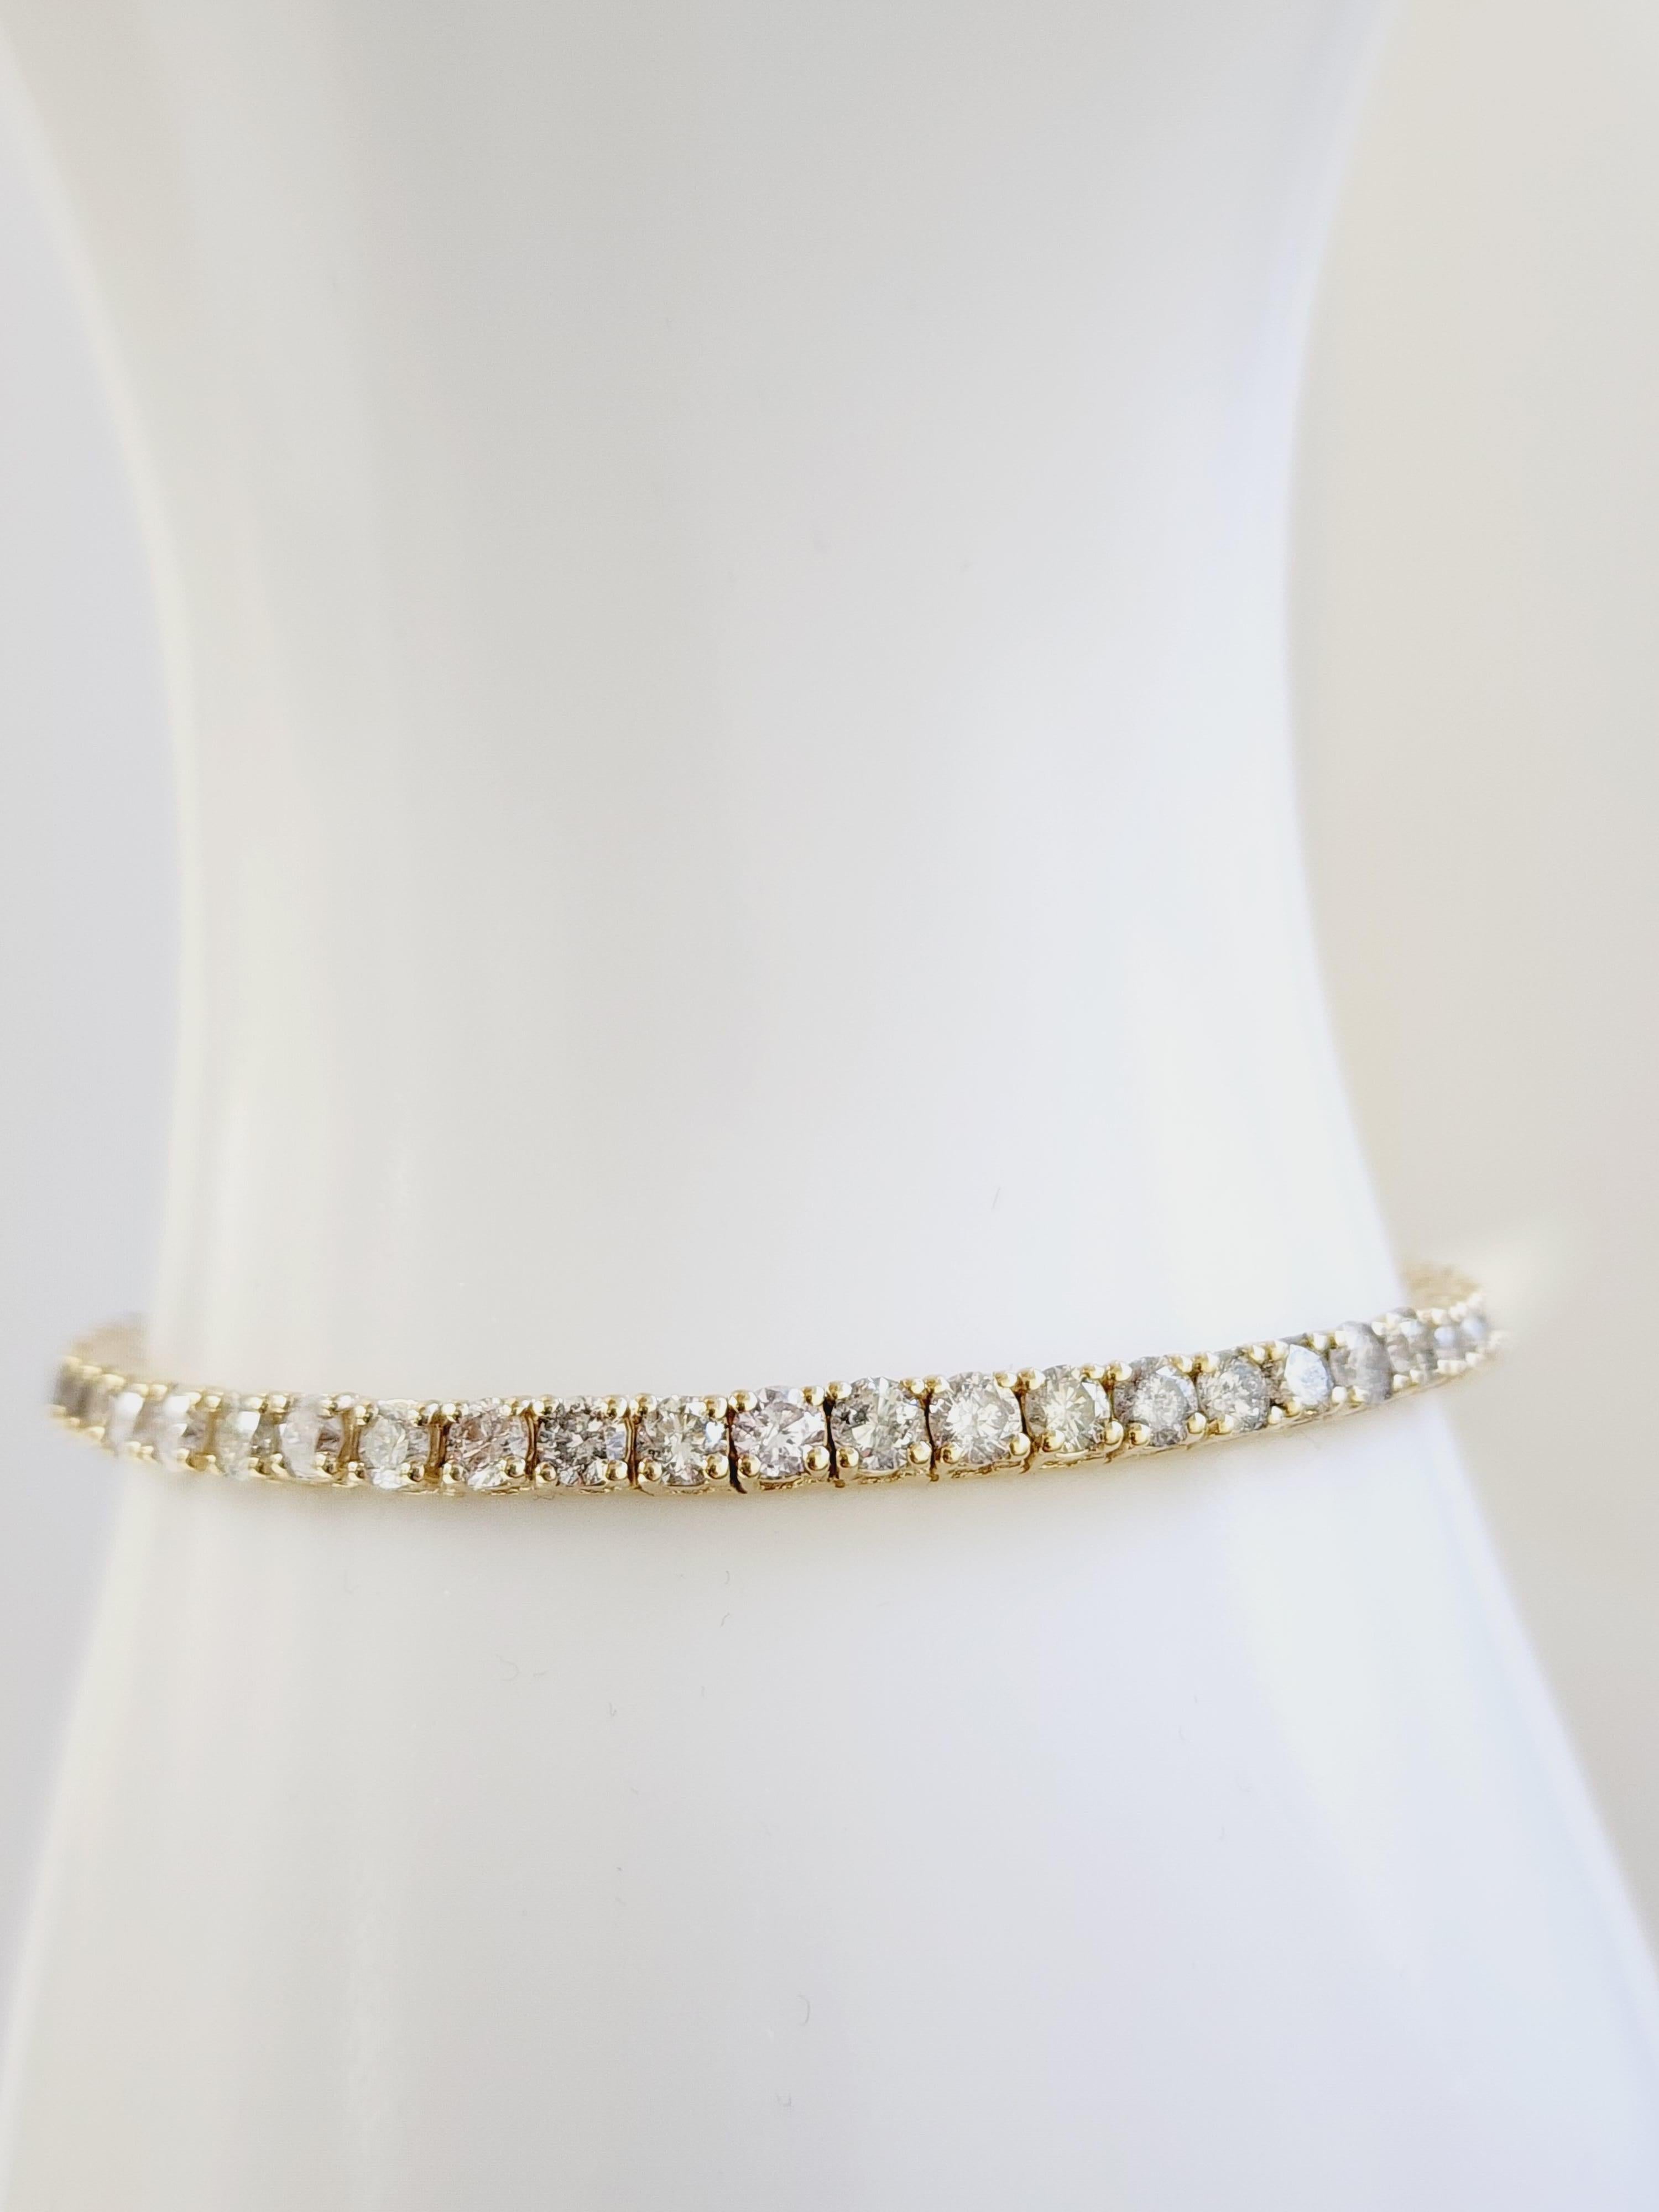 Beautiful natural diamond tennis bracelet, round-brilliant cut white diamonds clean and Excellent shine. 14k yellow gold classic four-prong style for maximum light brilliance. Ordinary style. Extraordinary elegance.

7 inch length.
3.1 mm